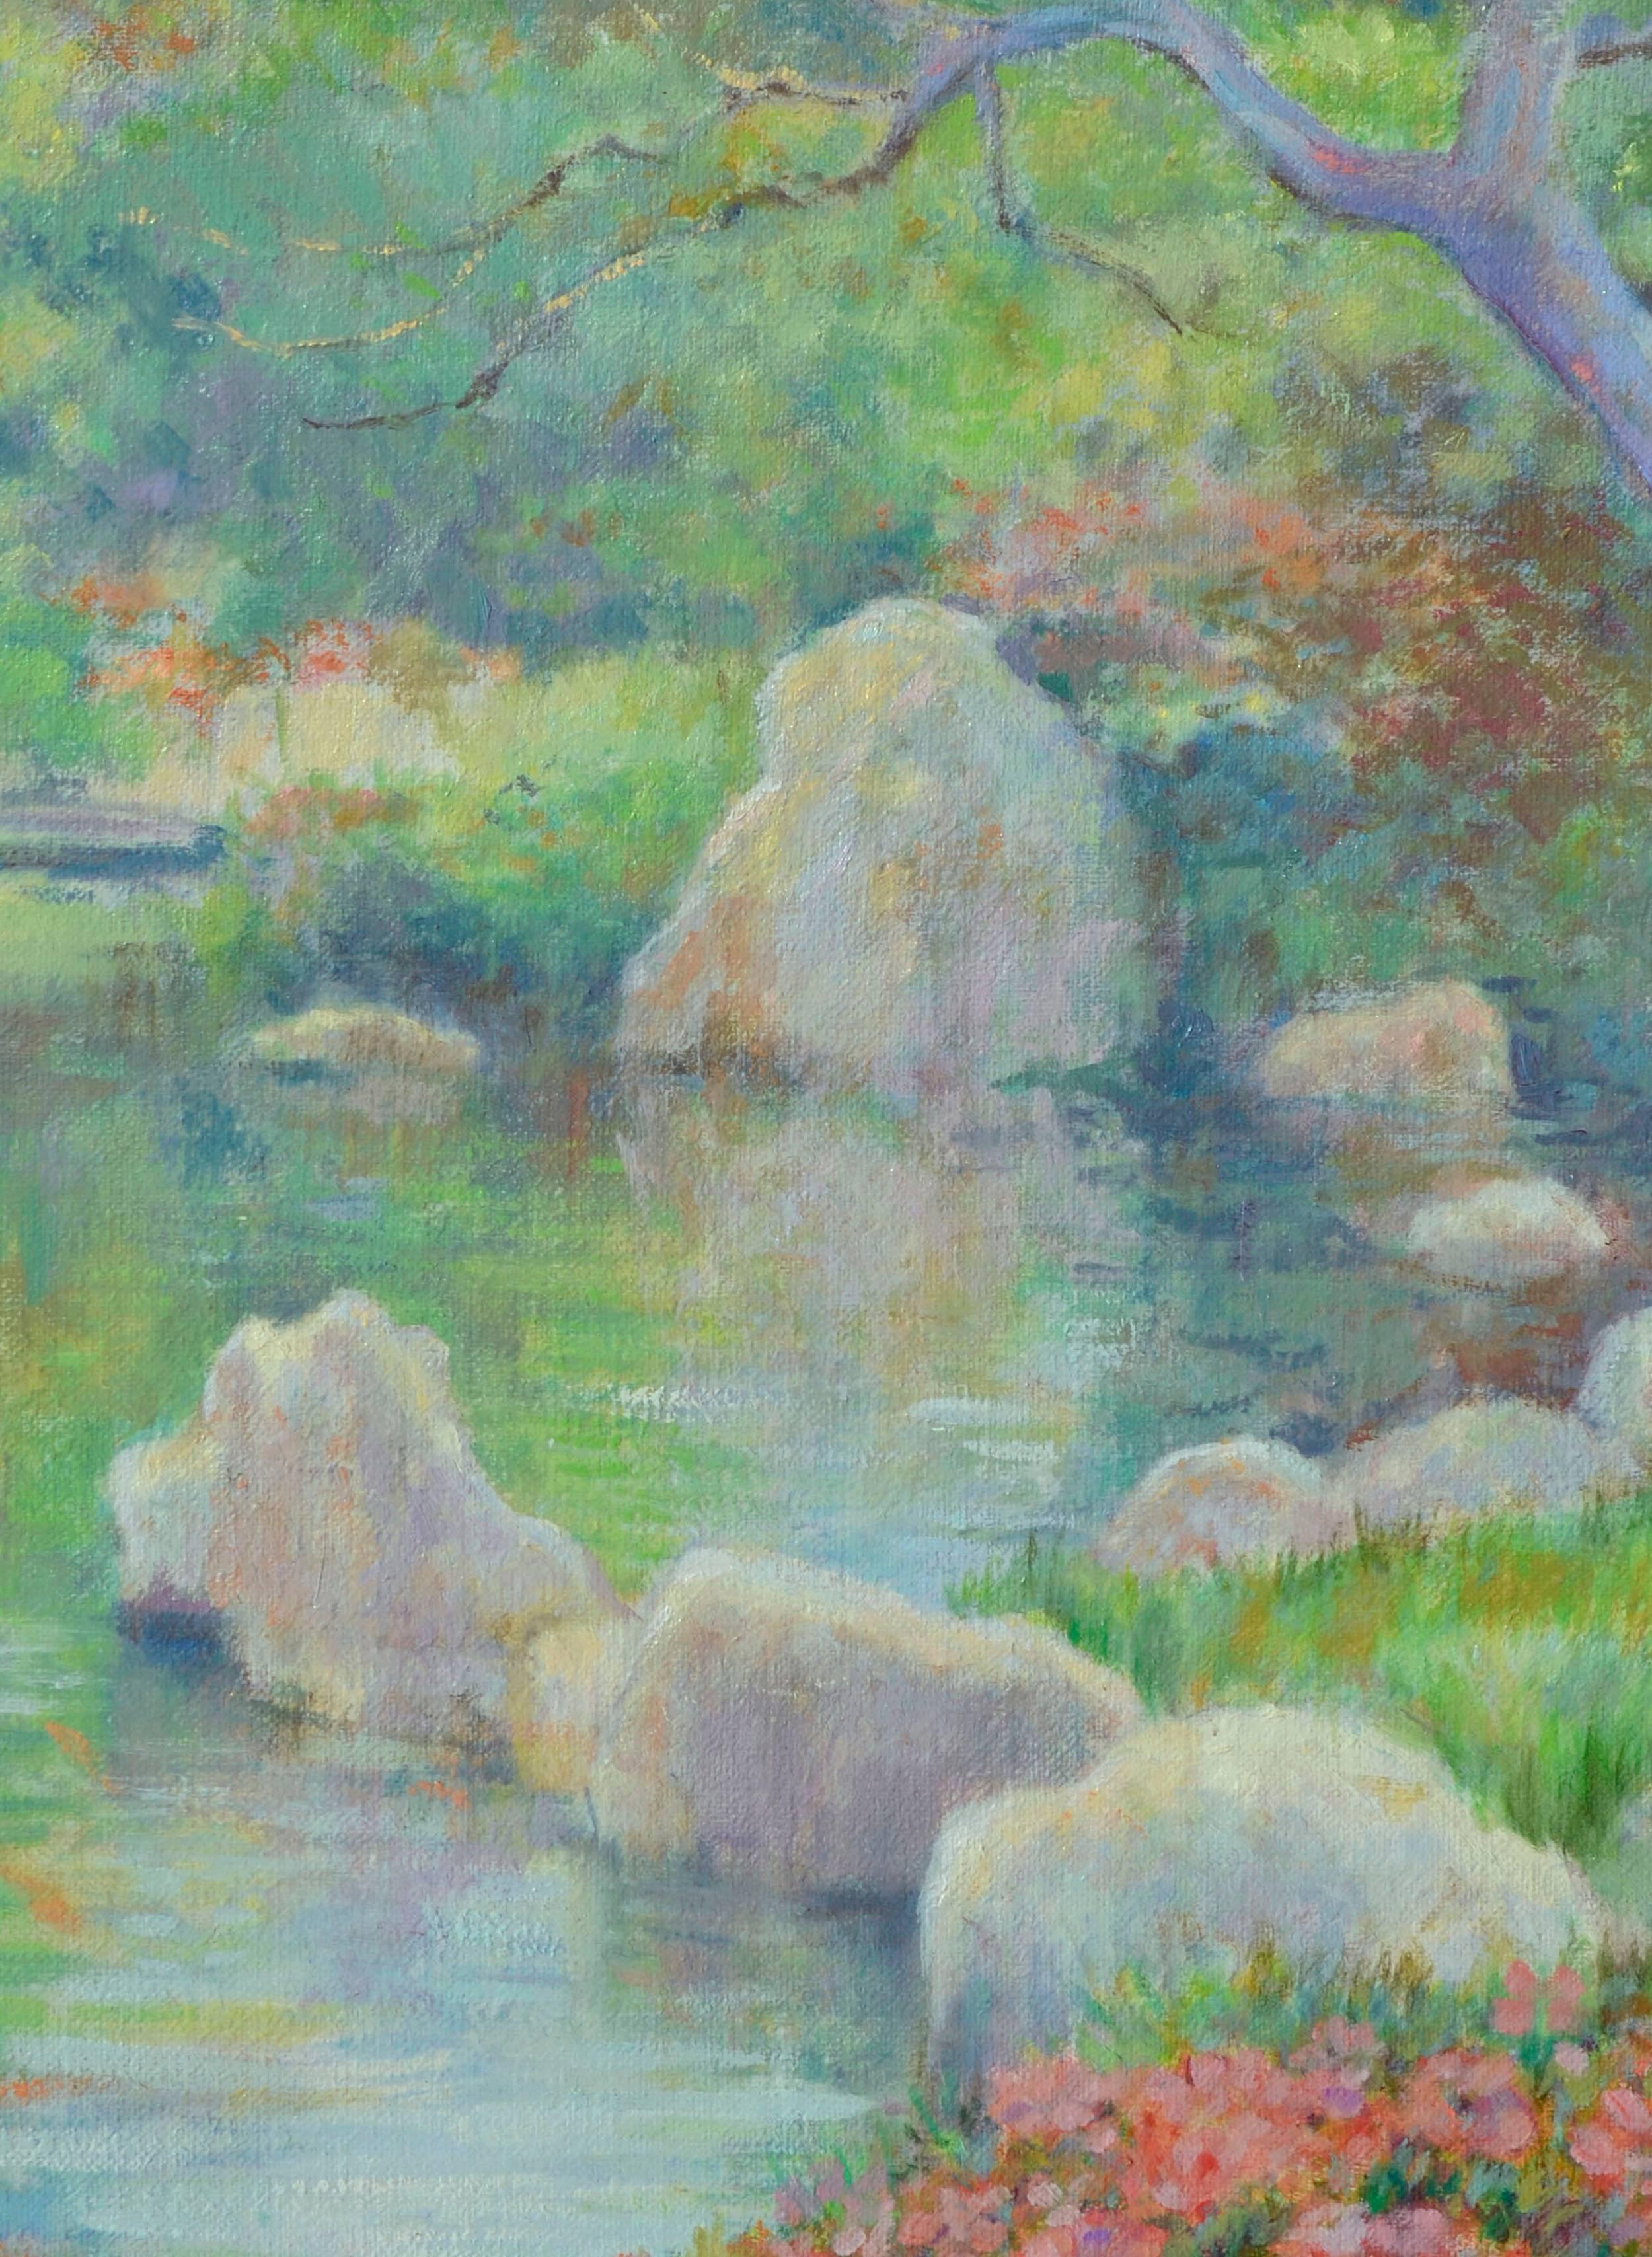 California Nature Landscape -- Springtime by the River - Painting by Ralph Edward Joosten